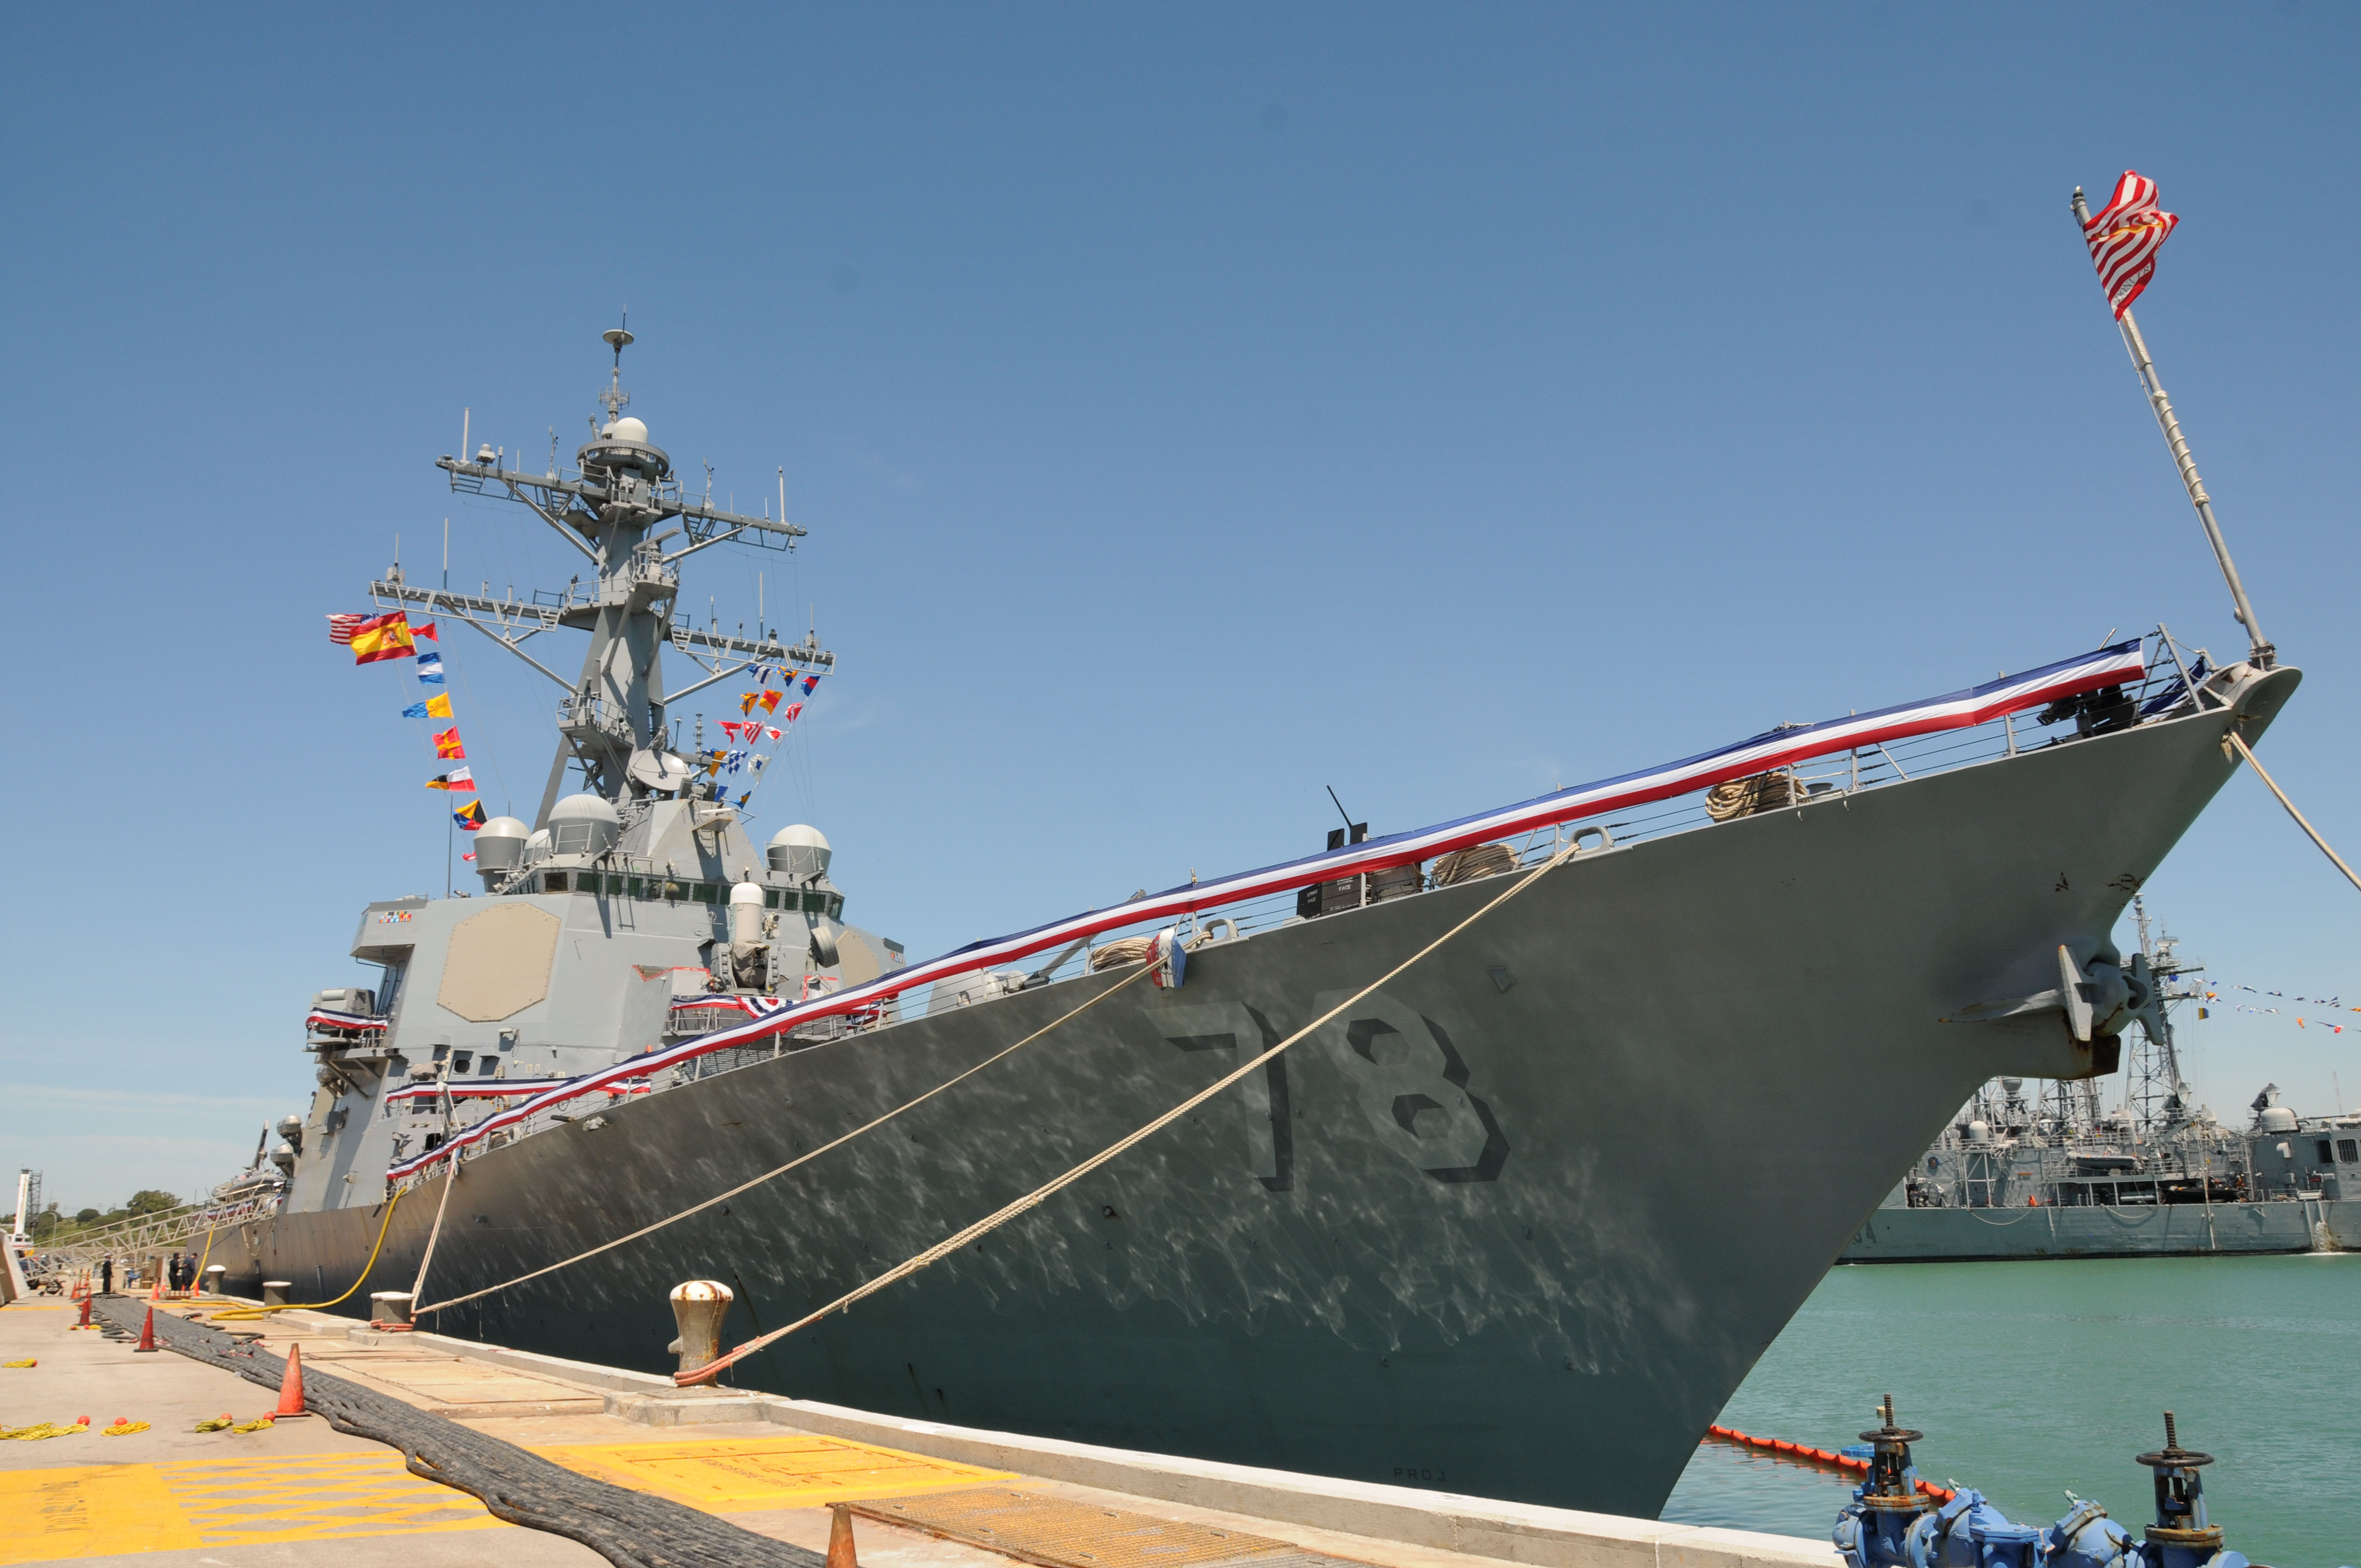 The Arleigh Burke-class guided-missile destroyer USS Porter (DDG 78) arrives at Naval Station Rota, Spain on April 30, 2015. US Navy photo.